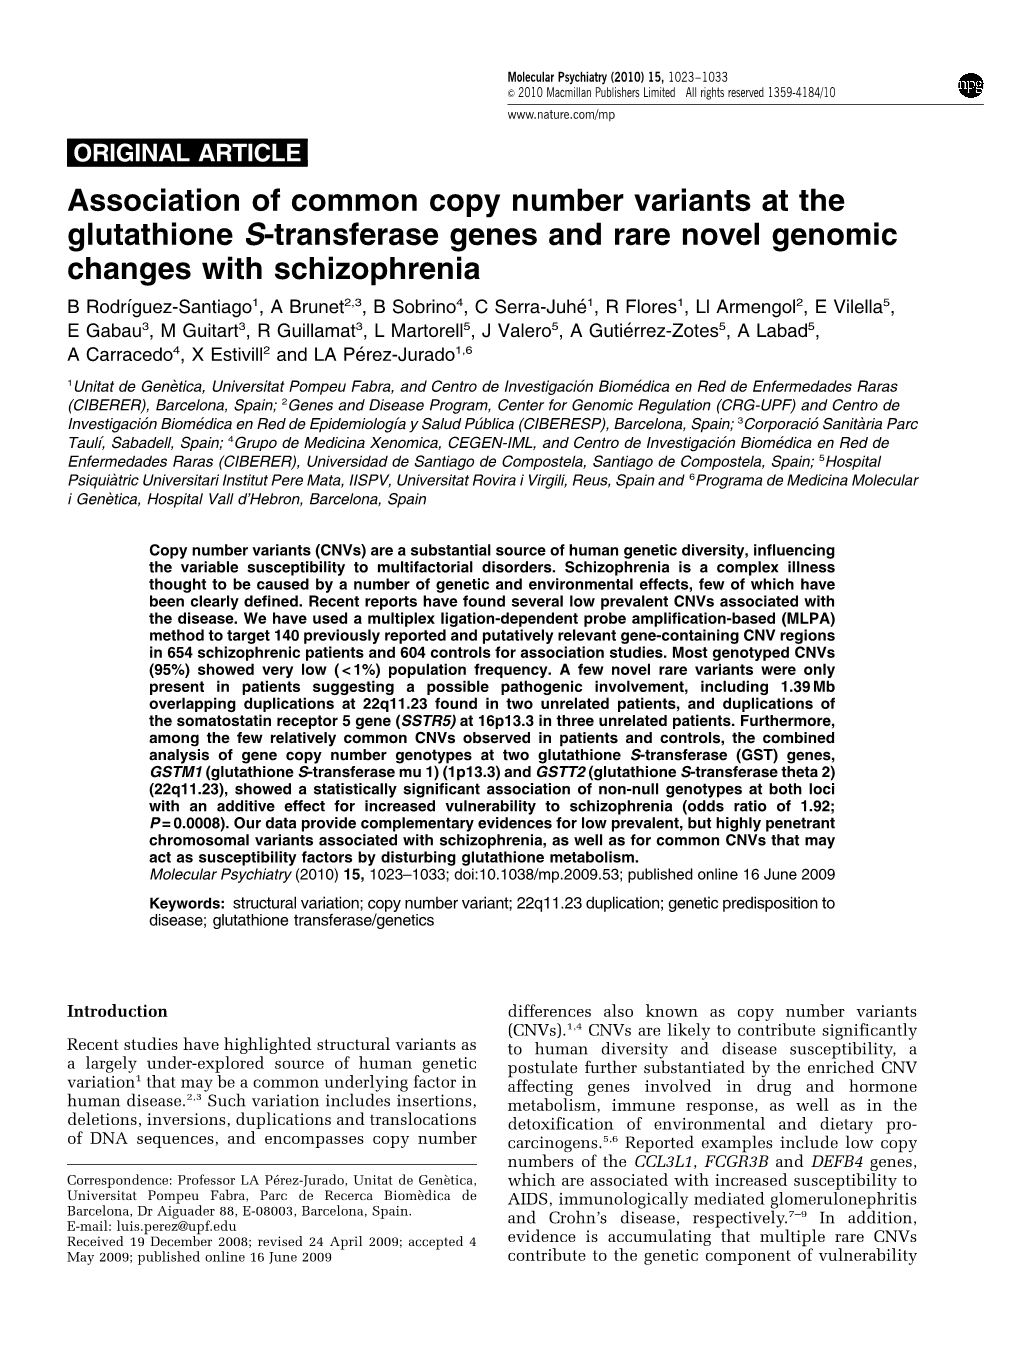 Association of Common Copy Number Variants at the Glutathione S